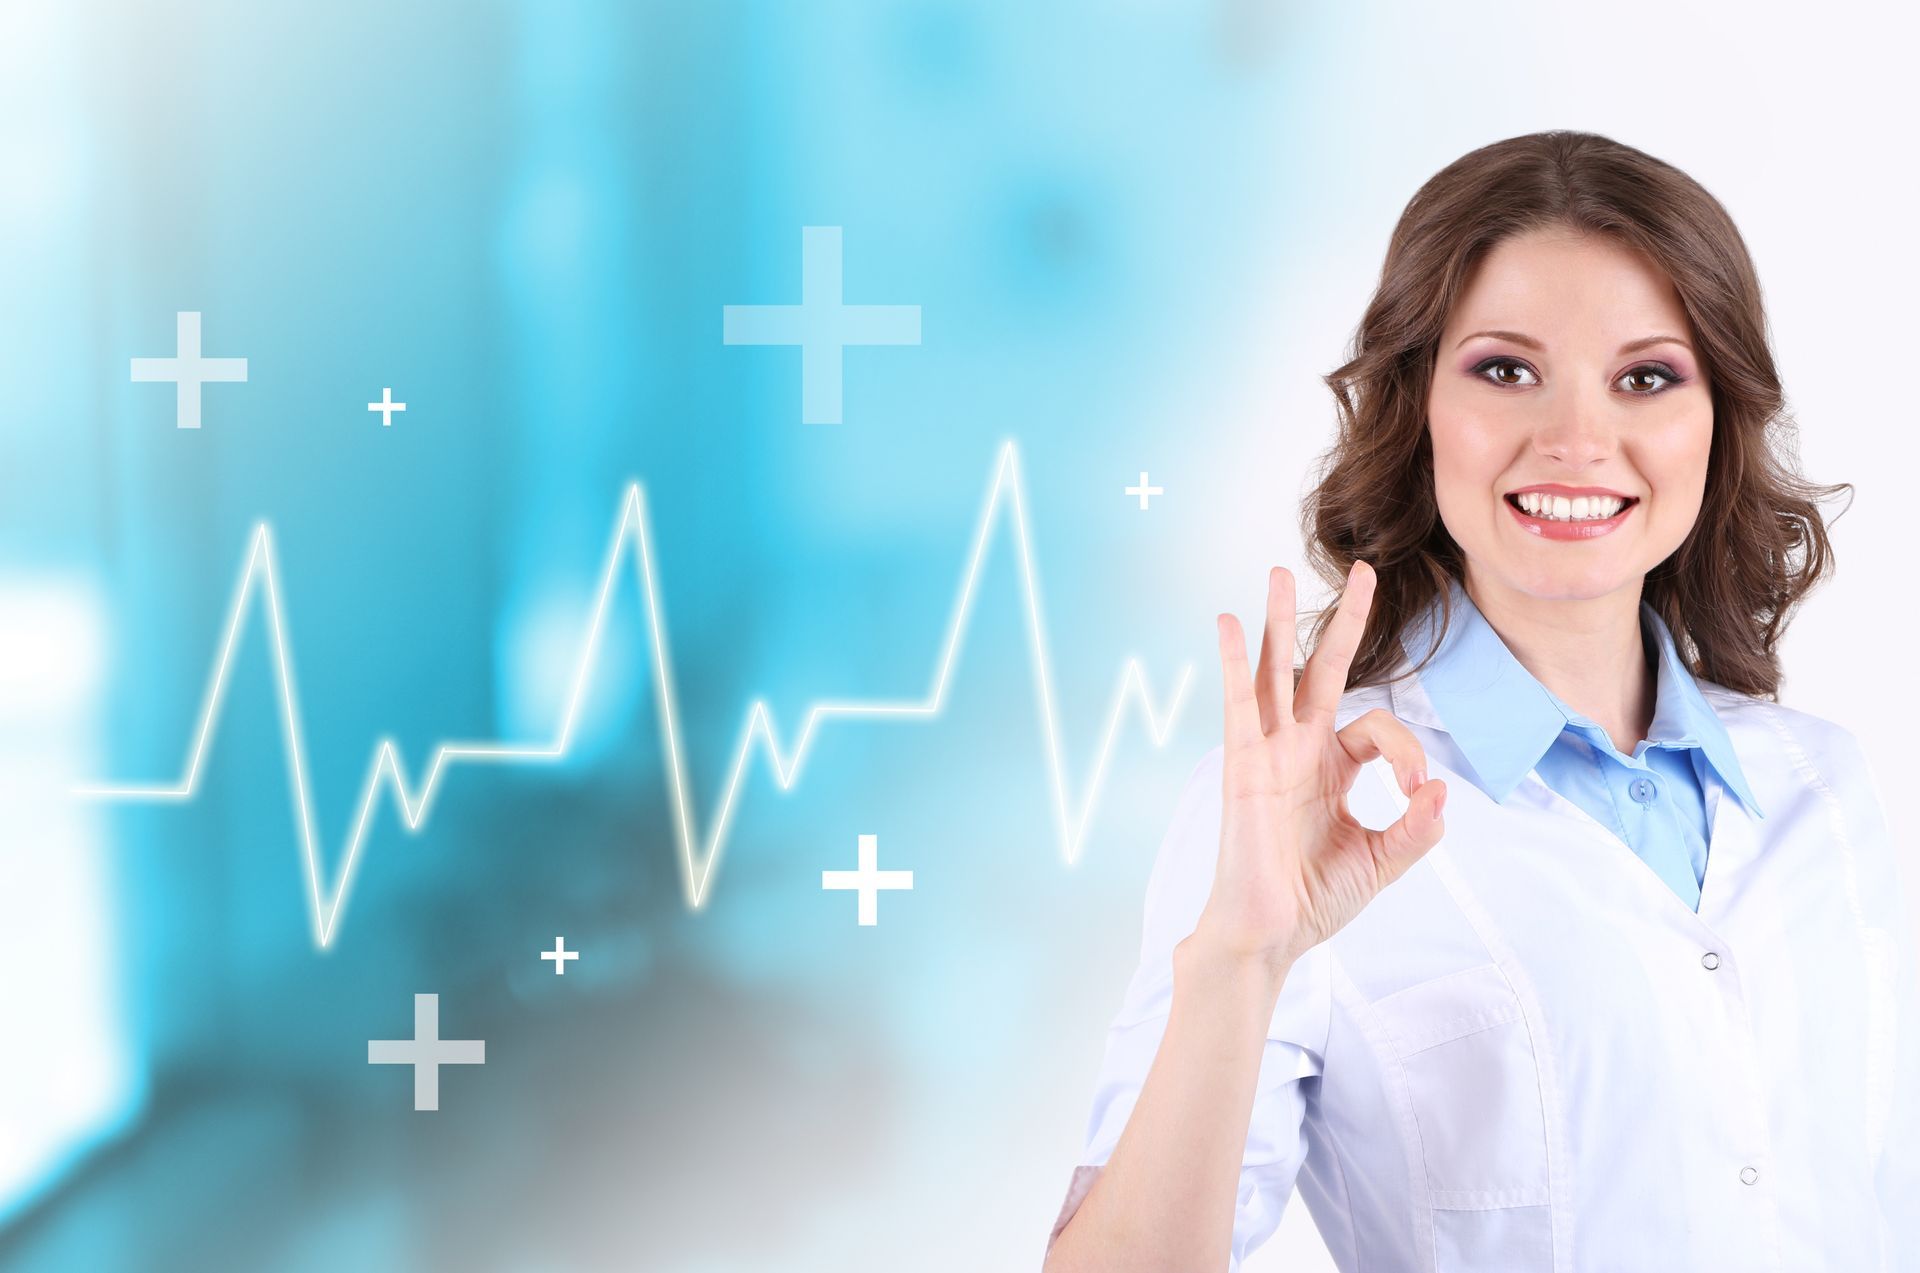 a female doctor giving an ok sign in front of a heartbeat graph, representing the close relationship DEZINES has with large global medical brands